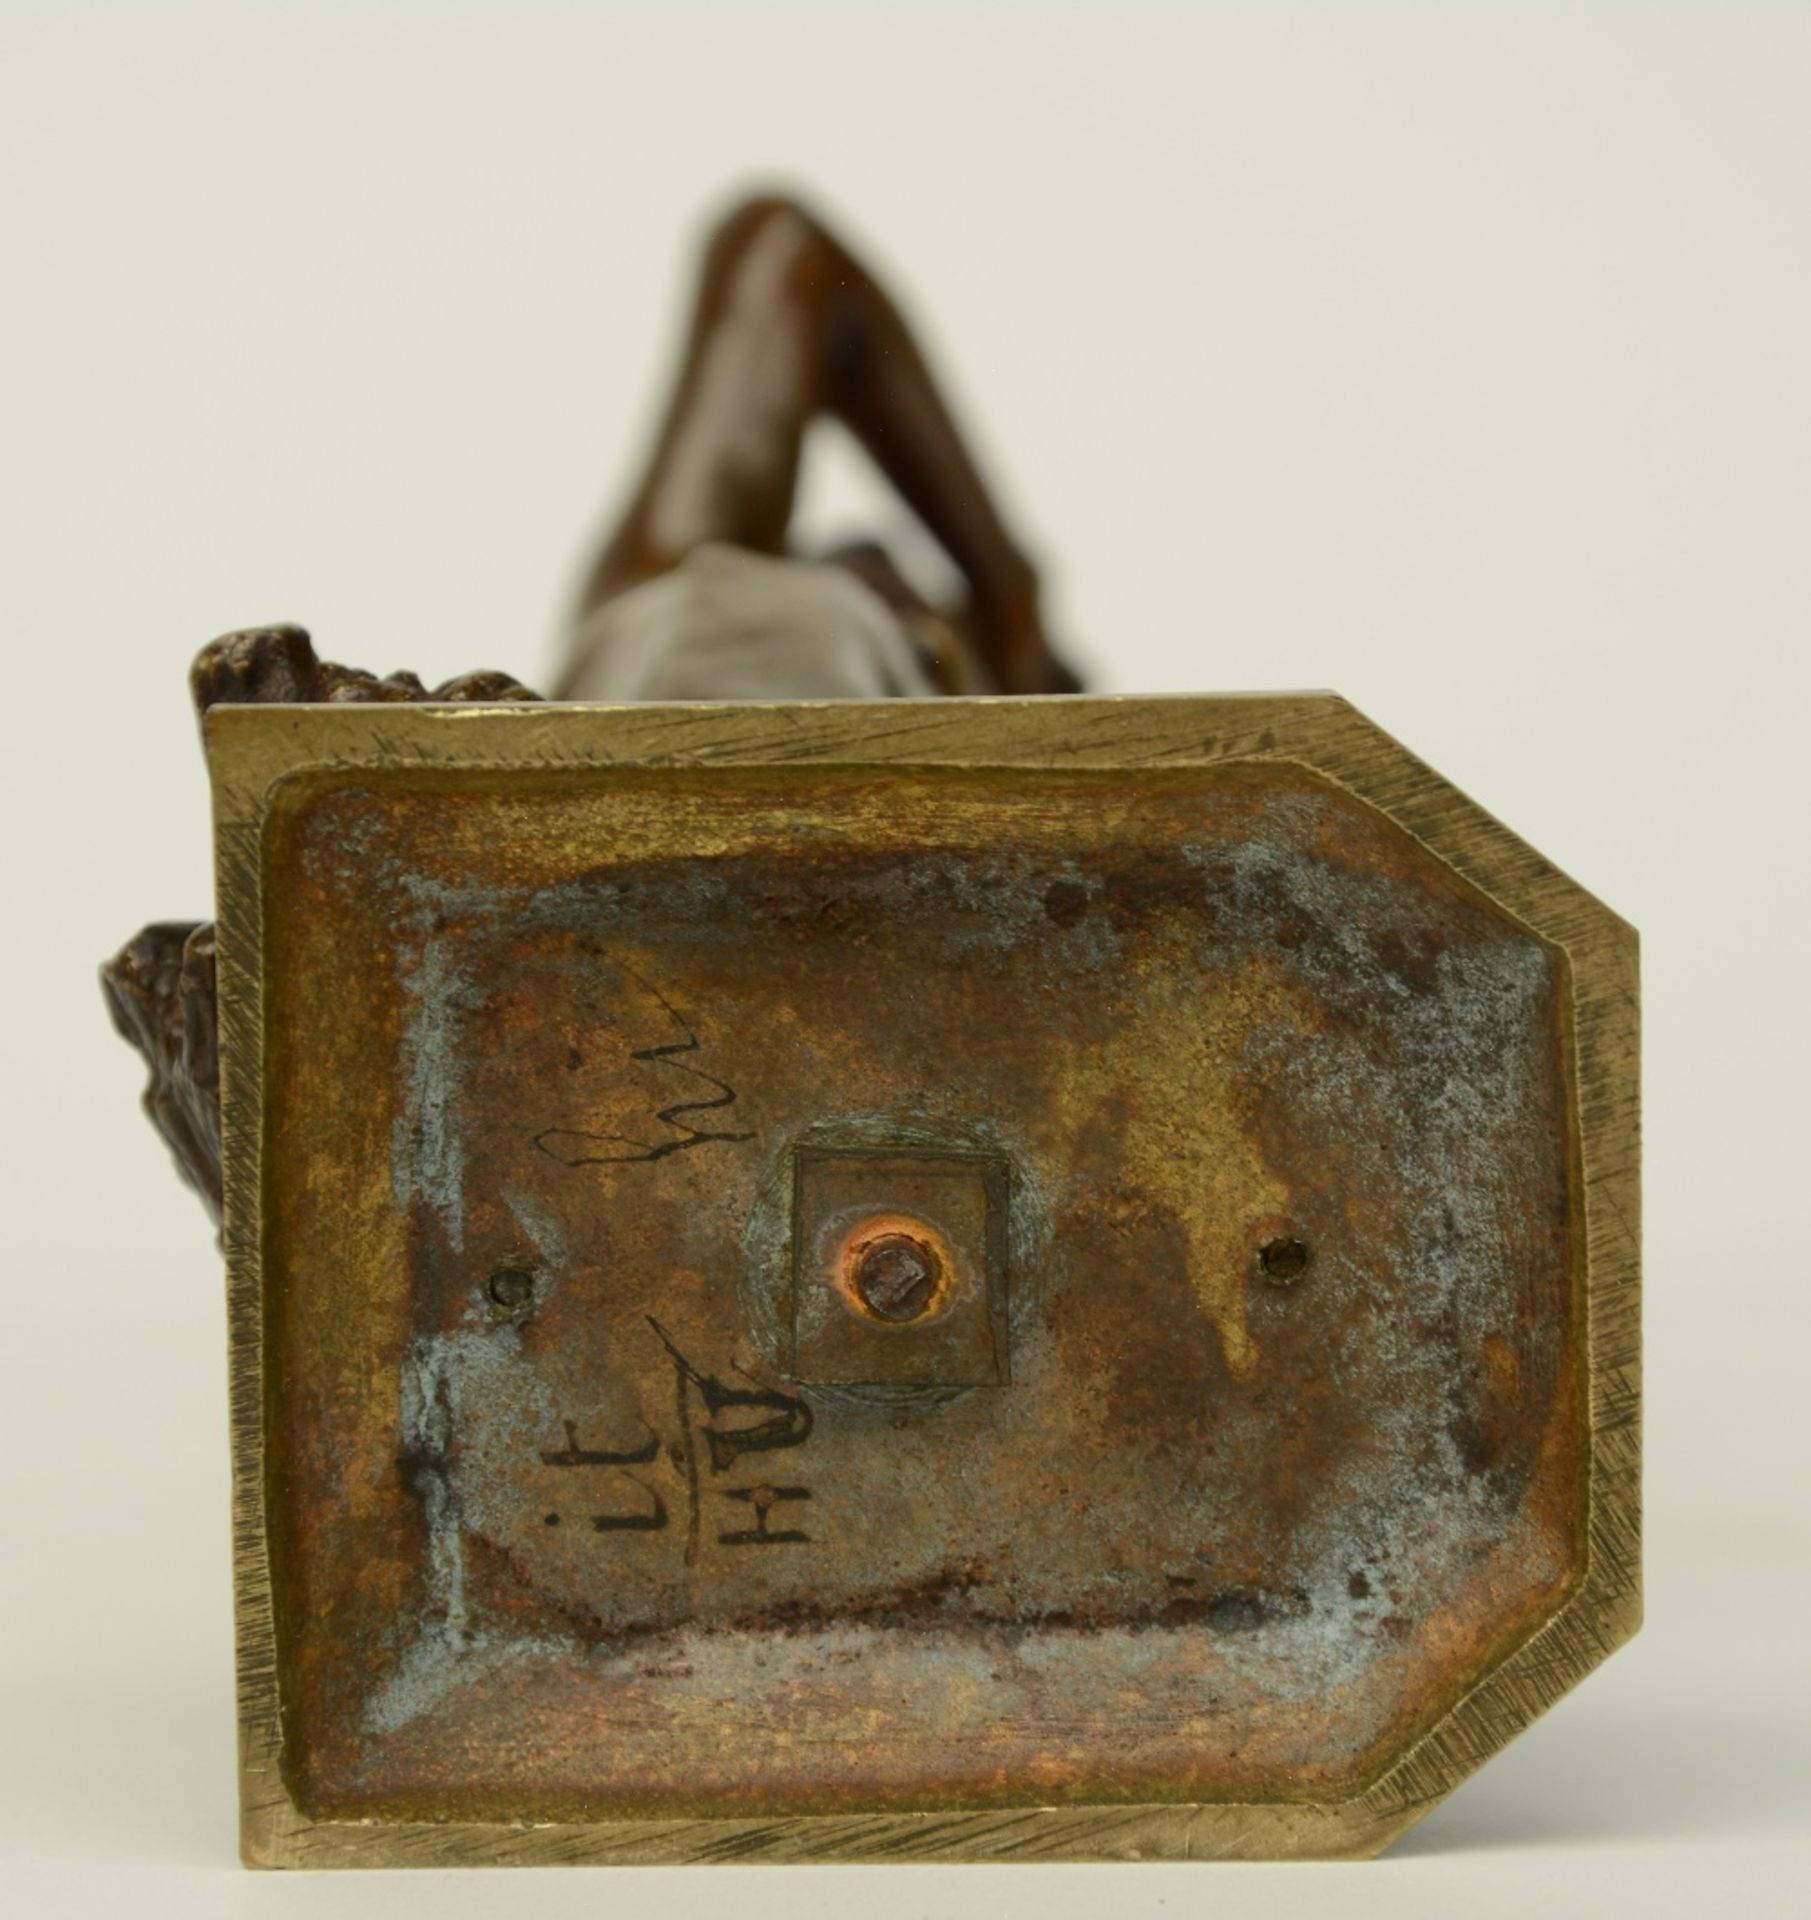 Causse J., patinated bronze sculpture depicting a mower, H 20 cm - Image 5 of 7